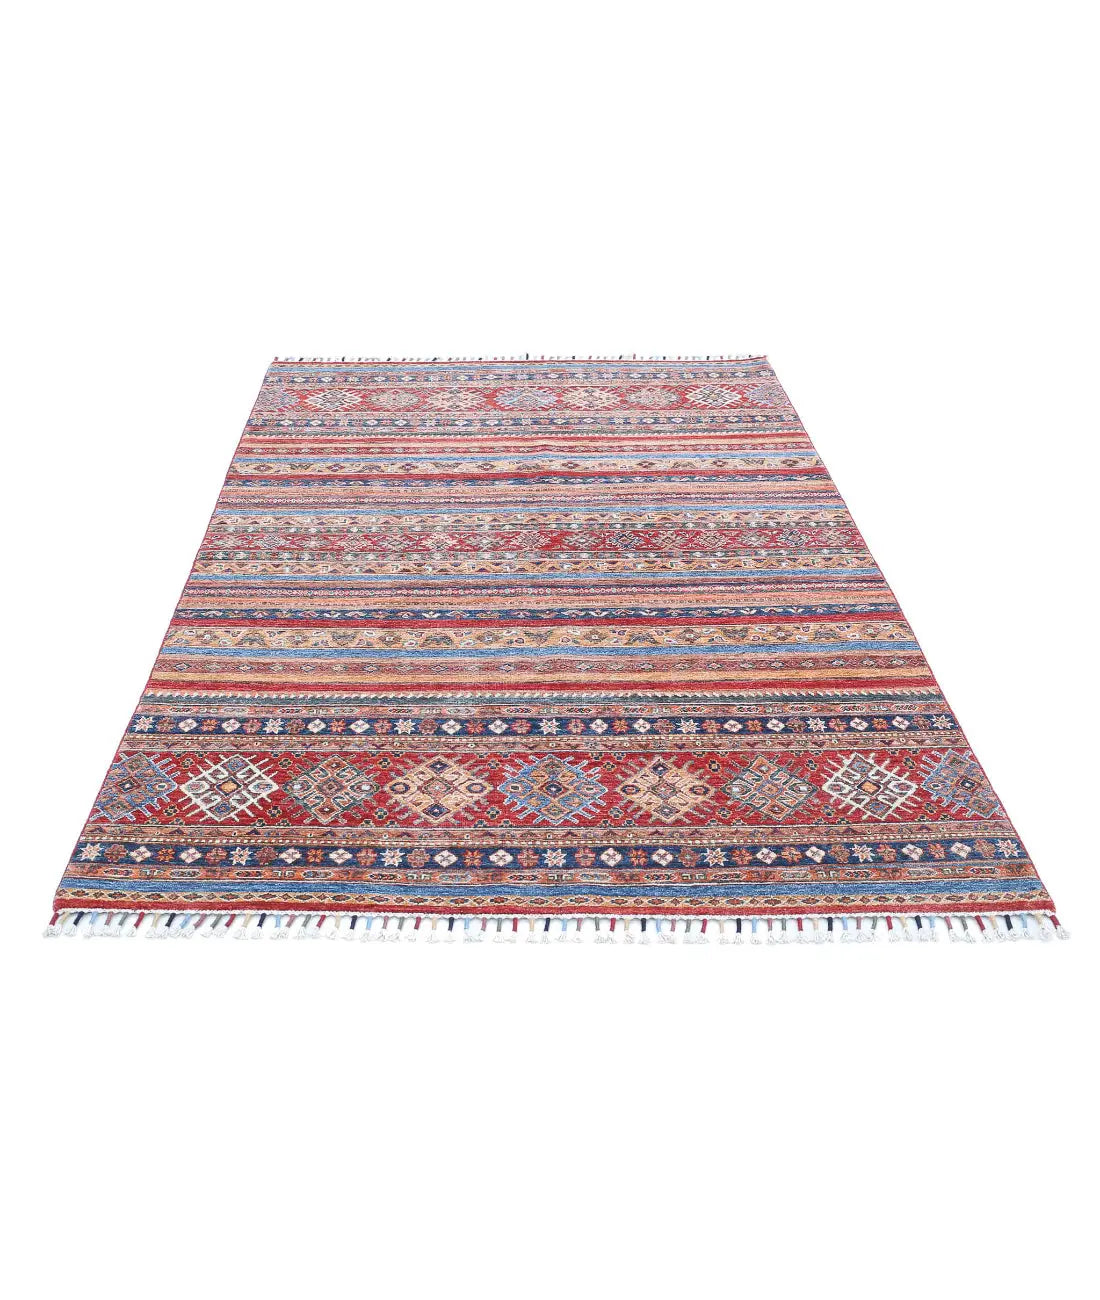 Hand Knotted Khurjeen Wool Rug - 4'11'' x 7'2''